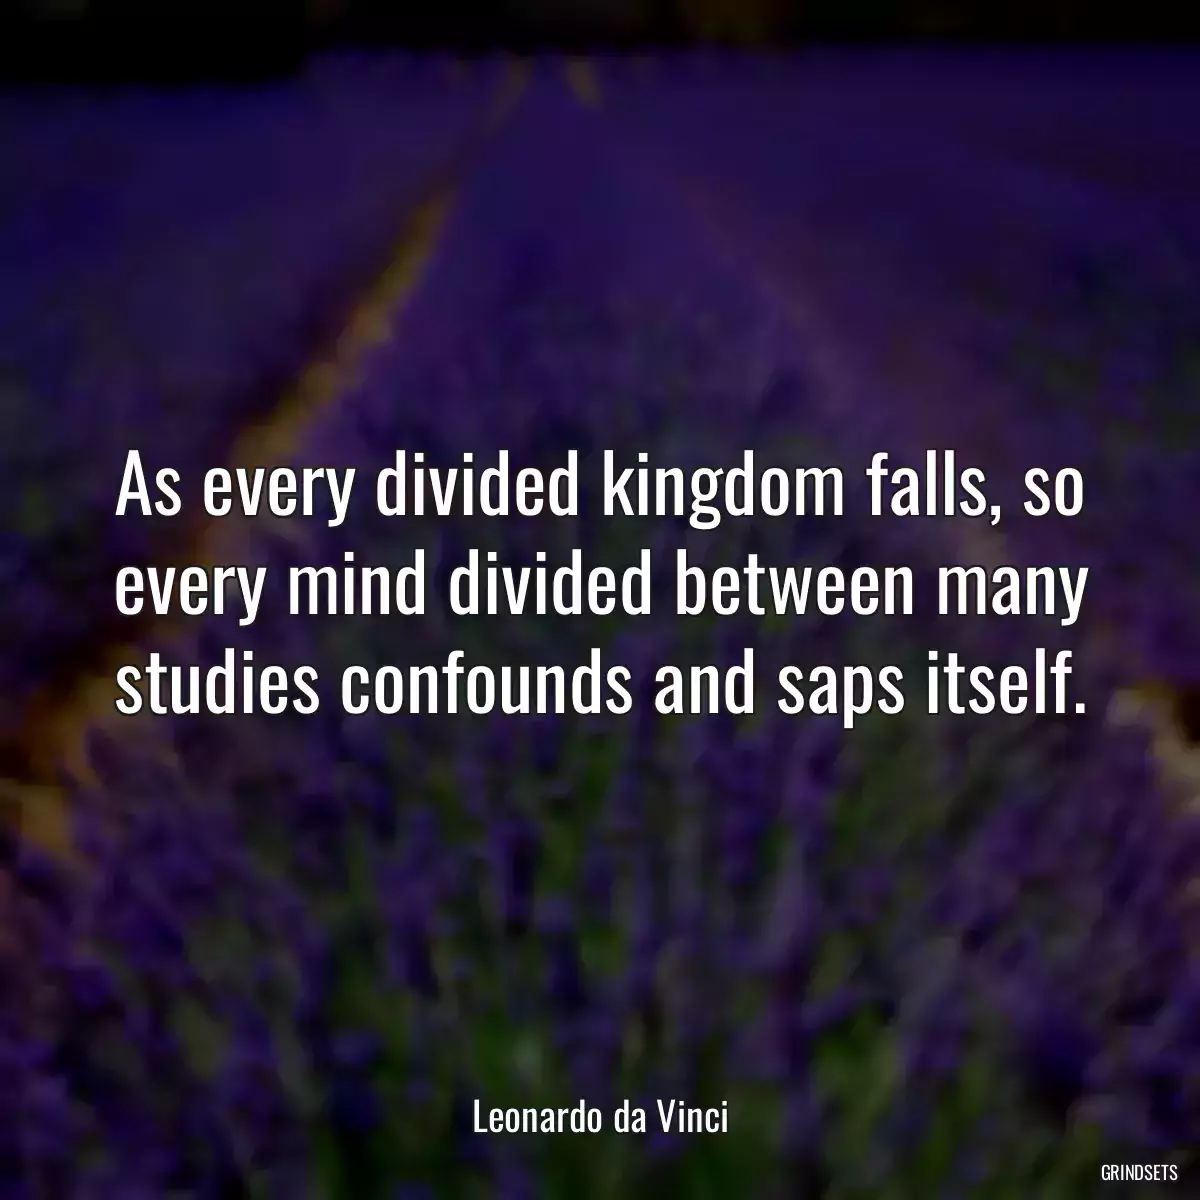 As every divided kingdom falls, so every mind divided between many studies confounds and saps itself.